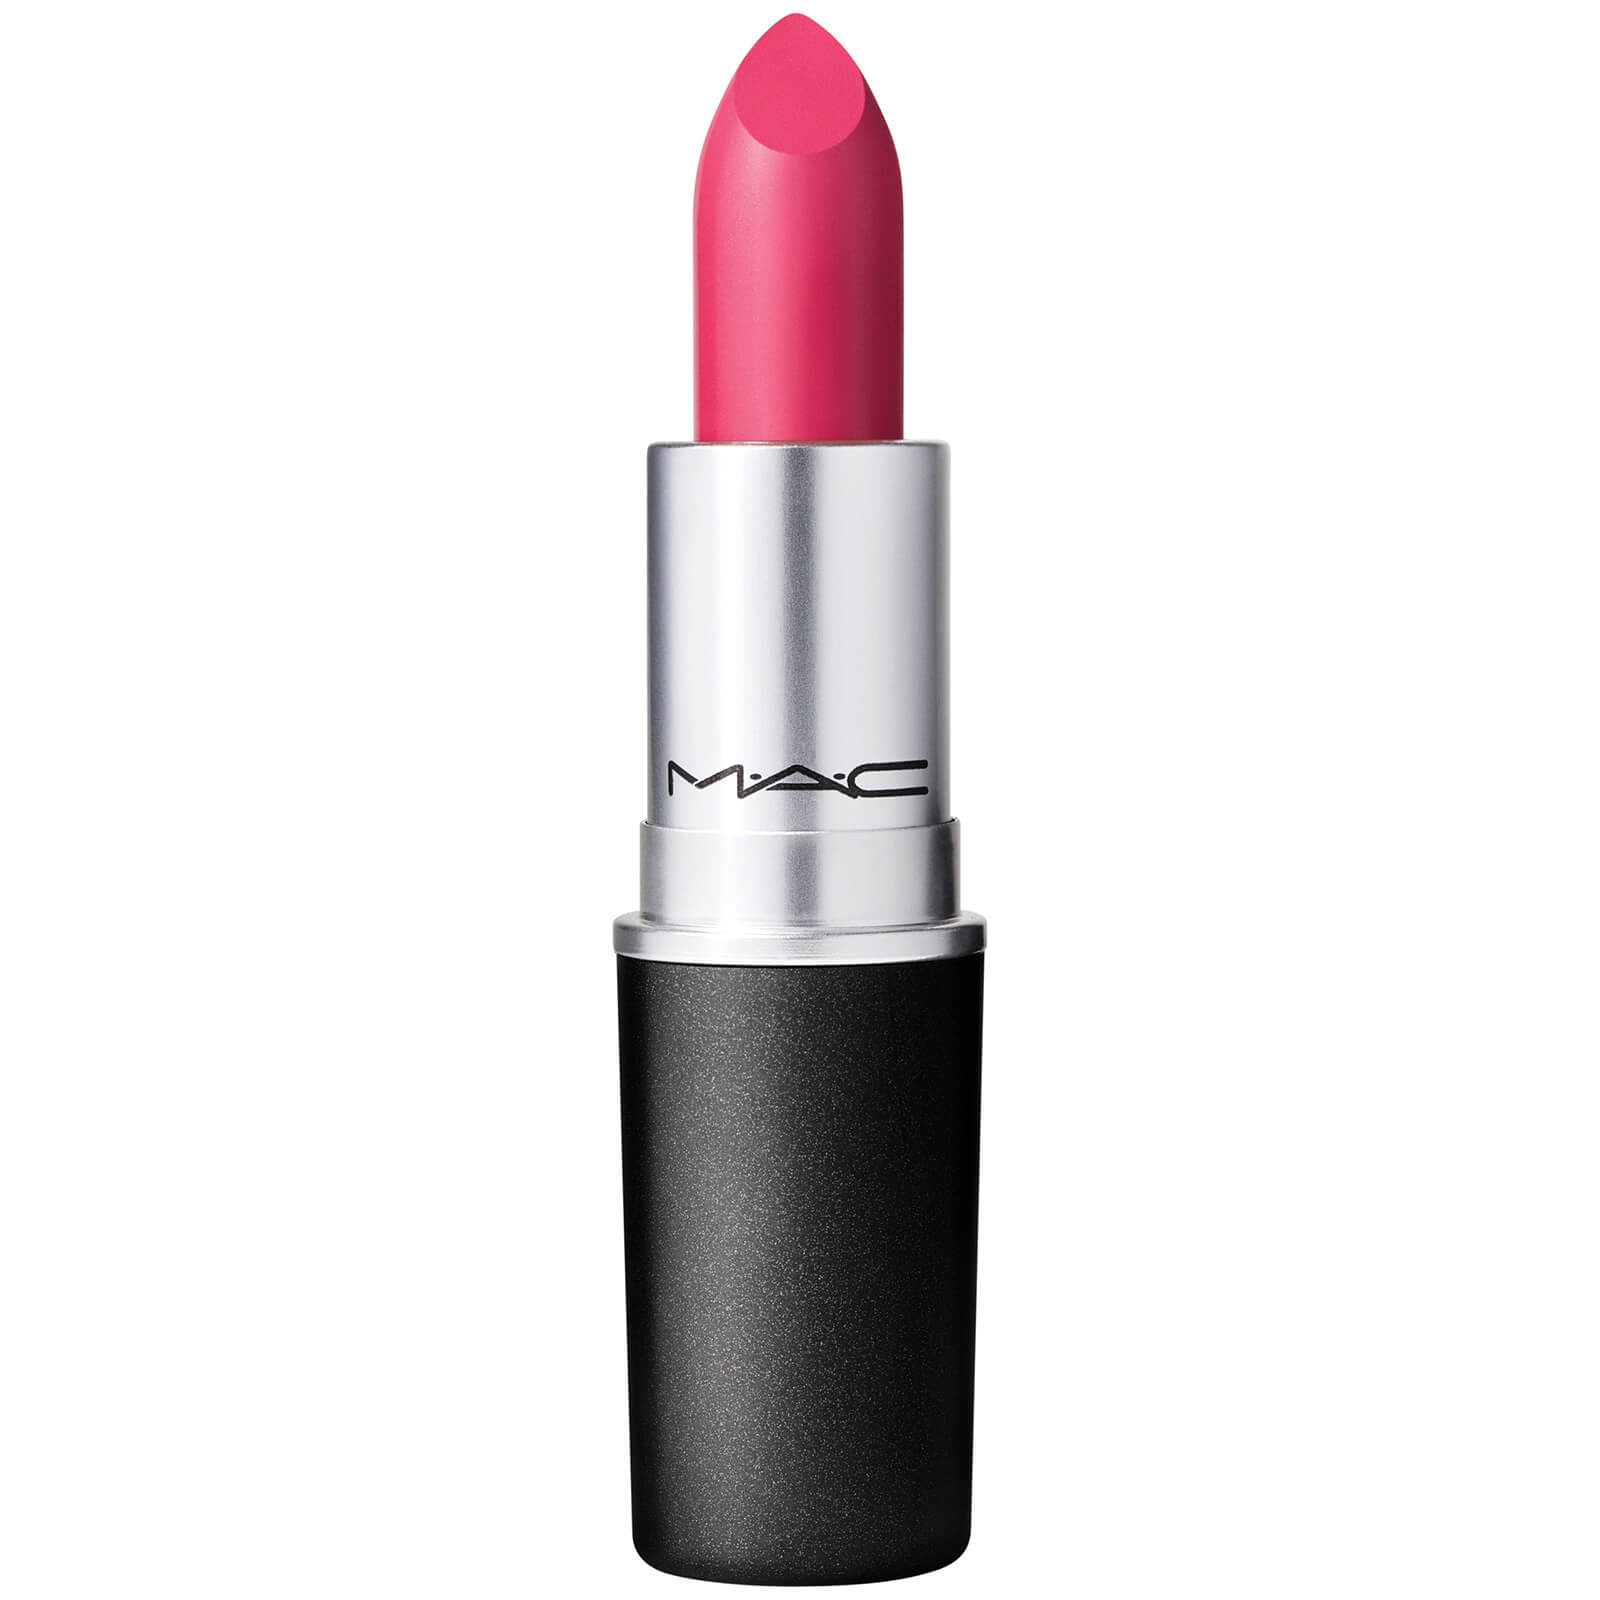 MAC Amplified Crème Lipstick Re-Think Pink (Various Shades) - Just Wondering